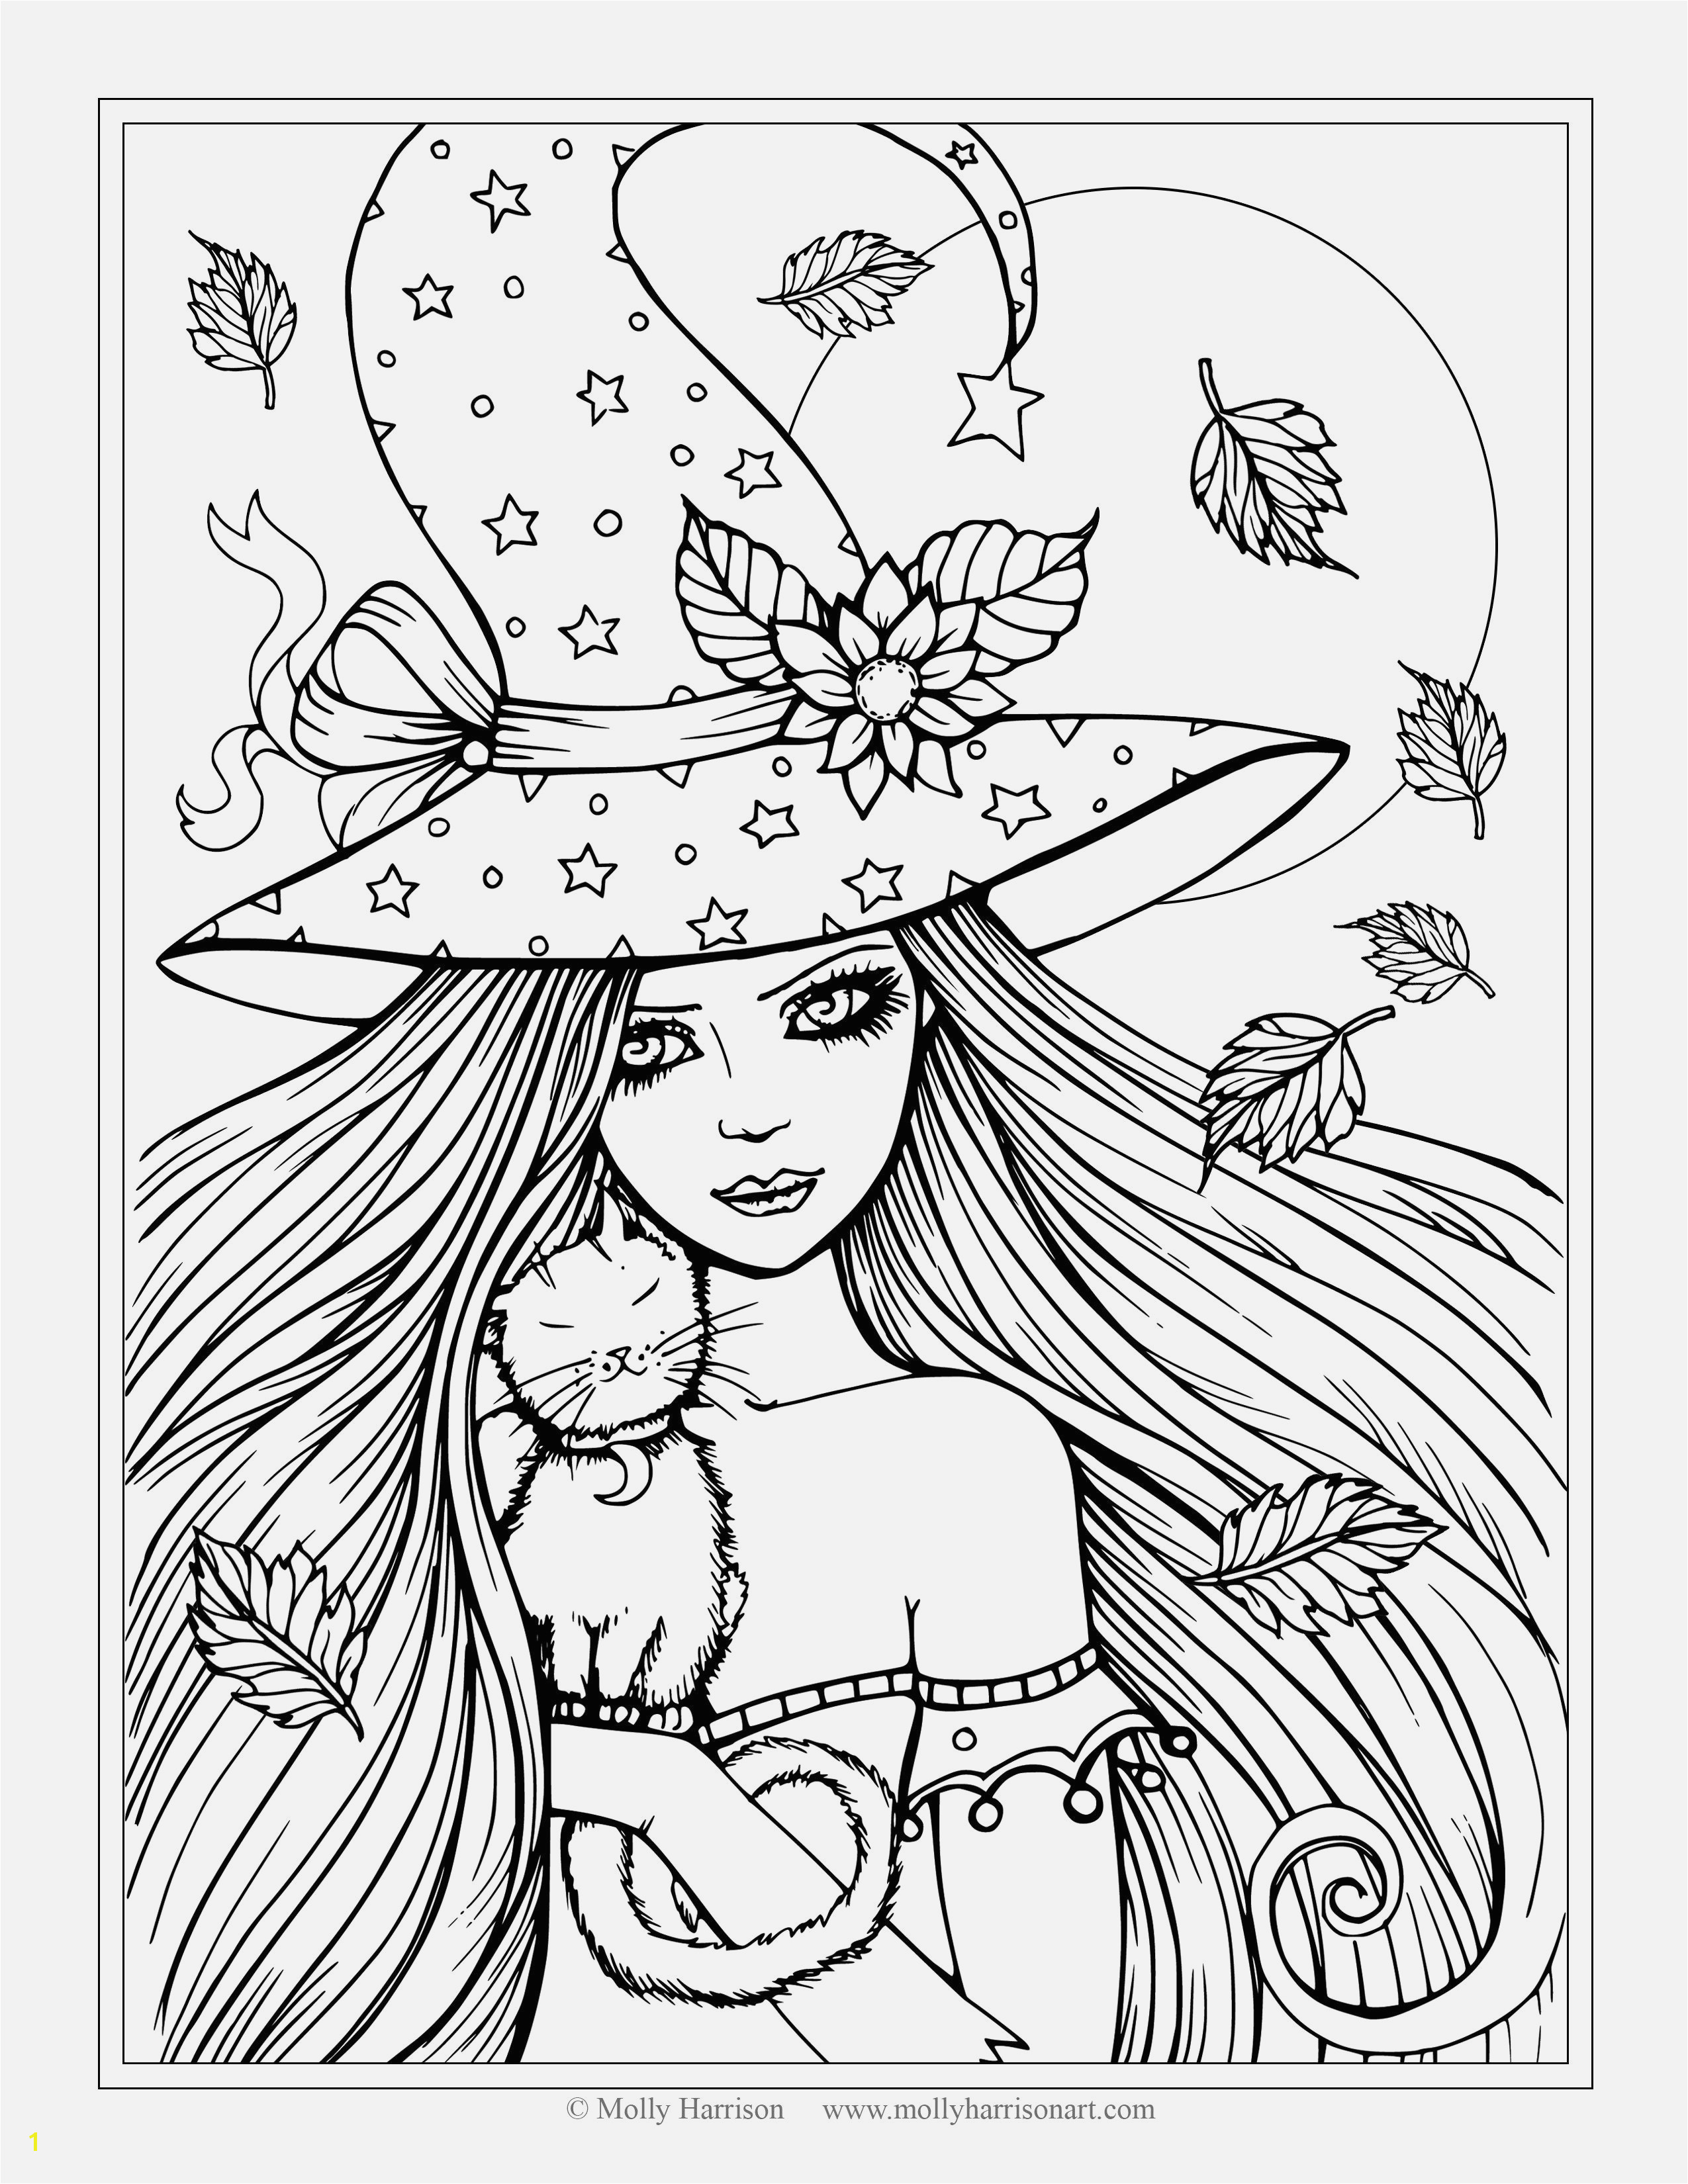 Red sox Coloring Pages Free Red sox Coloring Pages Printable Coloring Pages for Girls 12 and Up